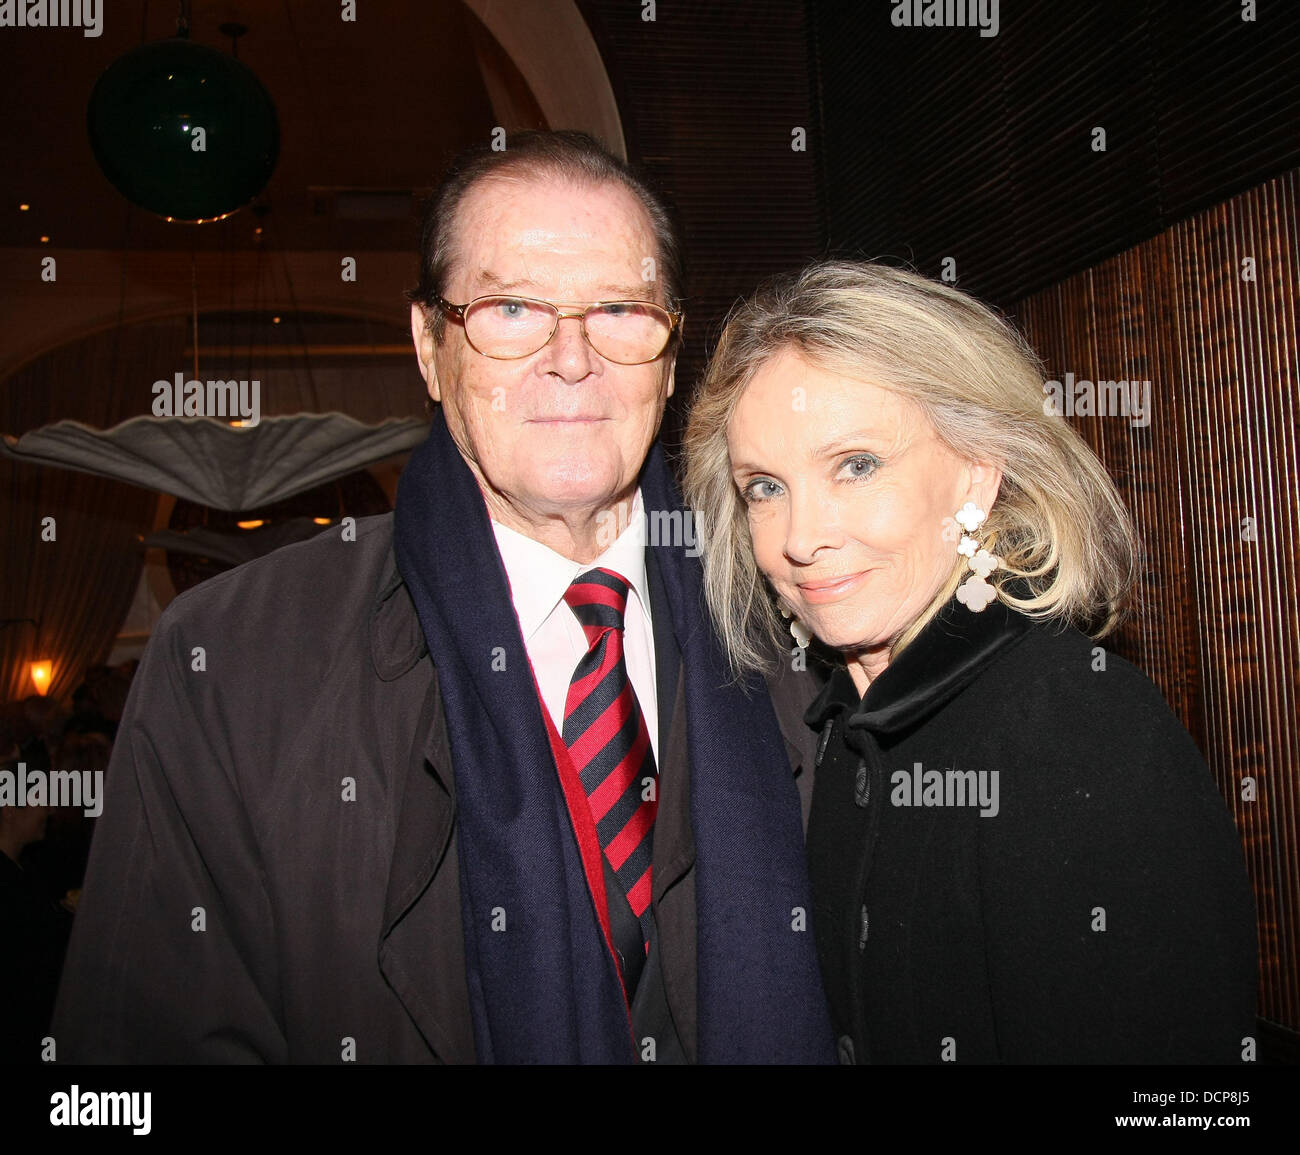 Sir Roger Moore and his wife Kristina Tholstrup attend The Sunday Times Winner's Dinners Awards 2011 at The Belvedere, Holland Park London, England - 01.11.11 Stock Photo